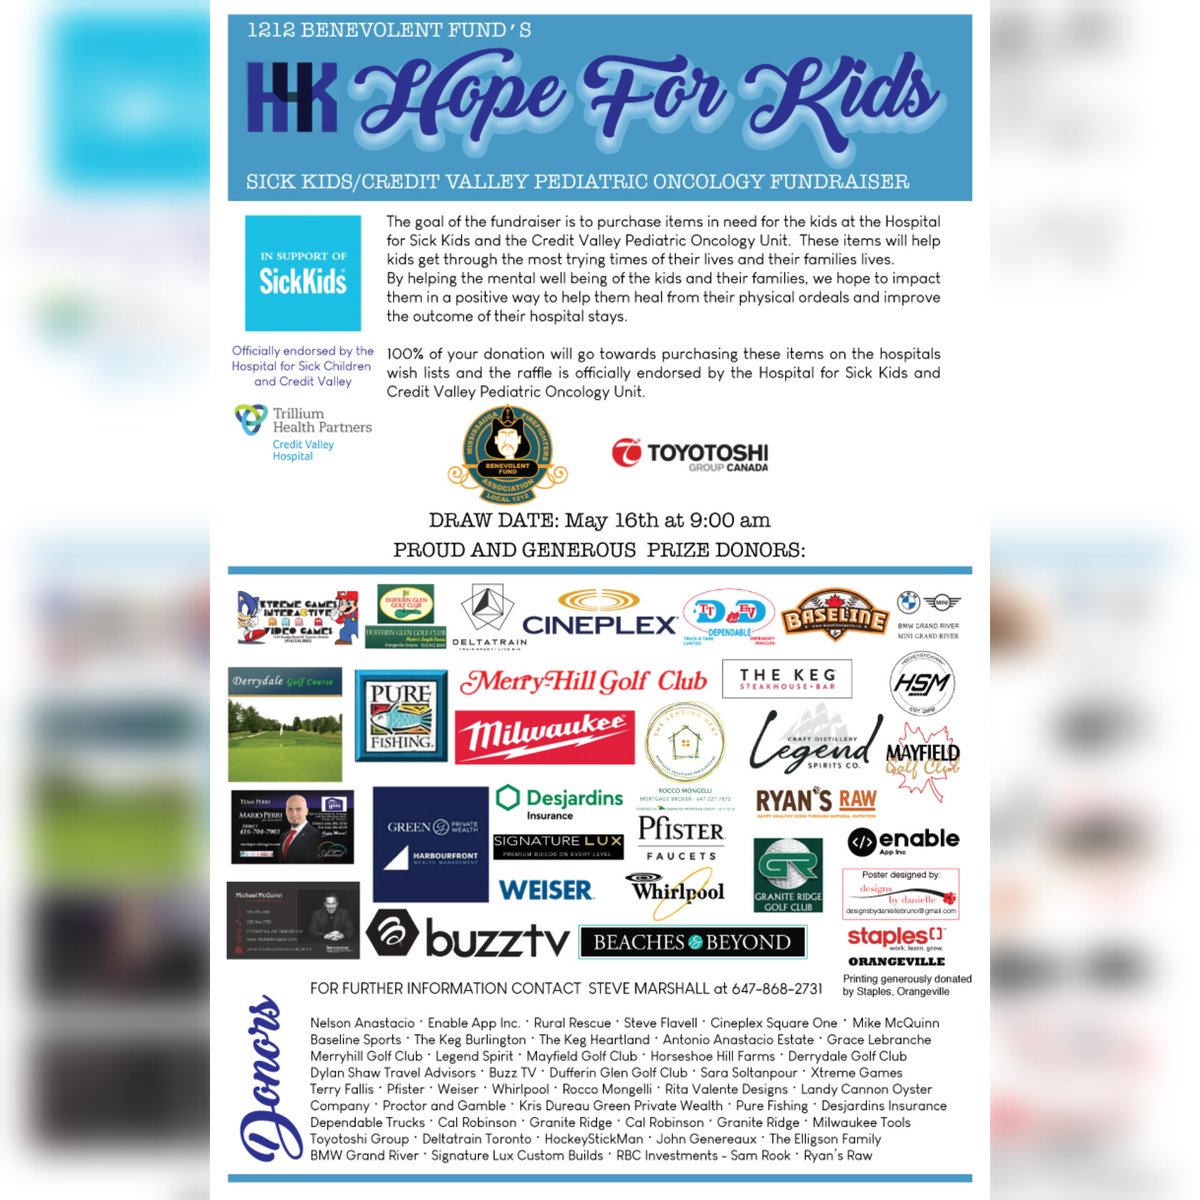 Have you purchased your tickets yet? There is still time! Introducing 'Hope For Kids': Our newest fundraiser raising money for @SickKids and the Credit Valley Oncology Unit. Click the link in our bio or visit our website at loom.ly/igMIugE to purchase today!